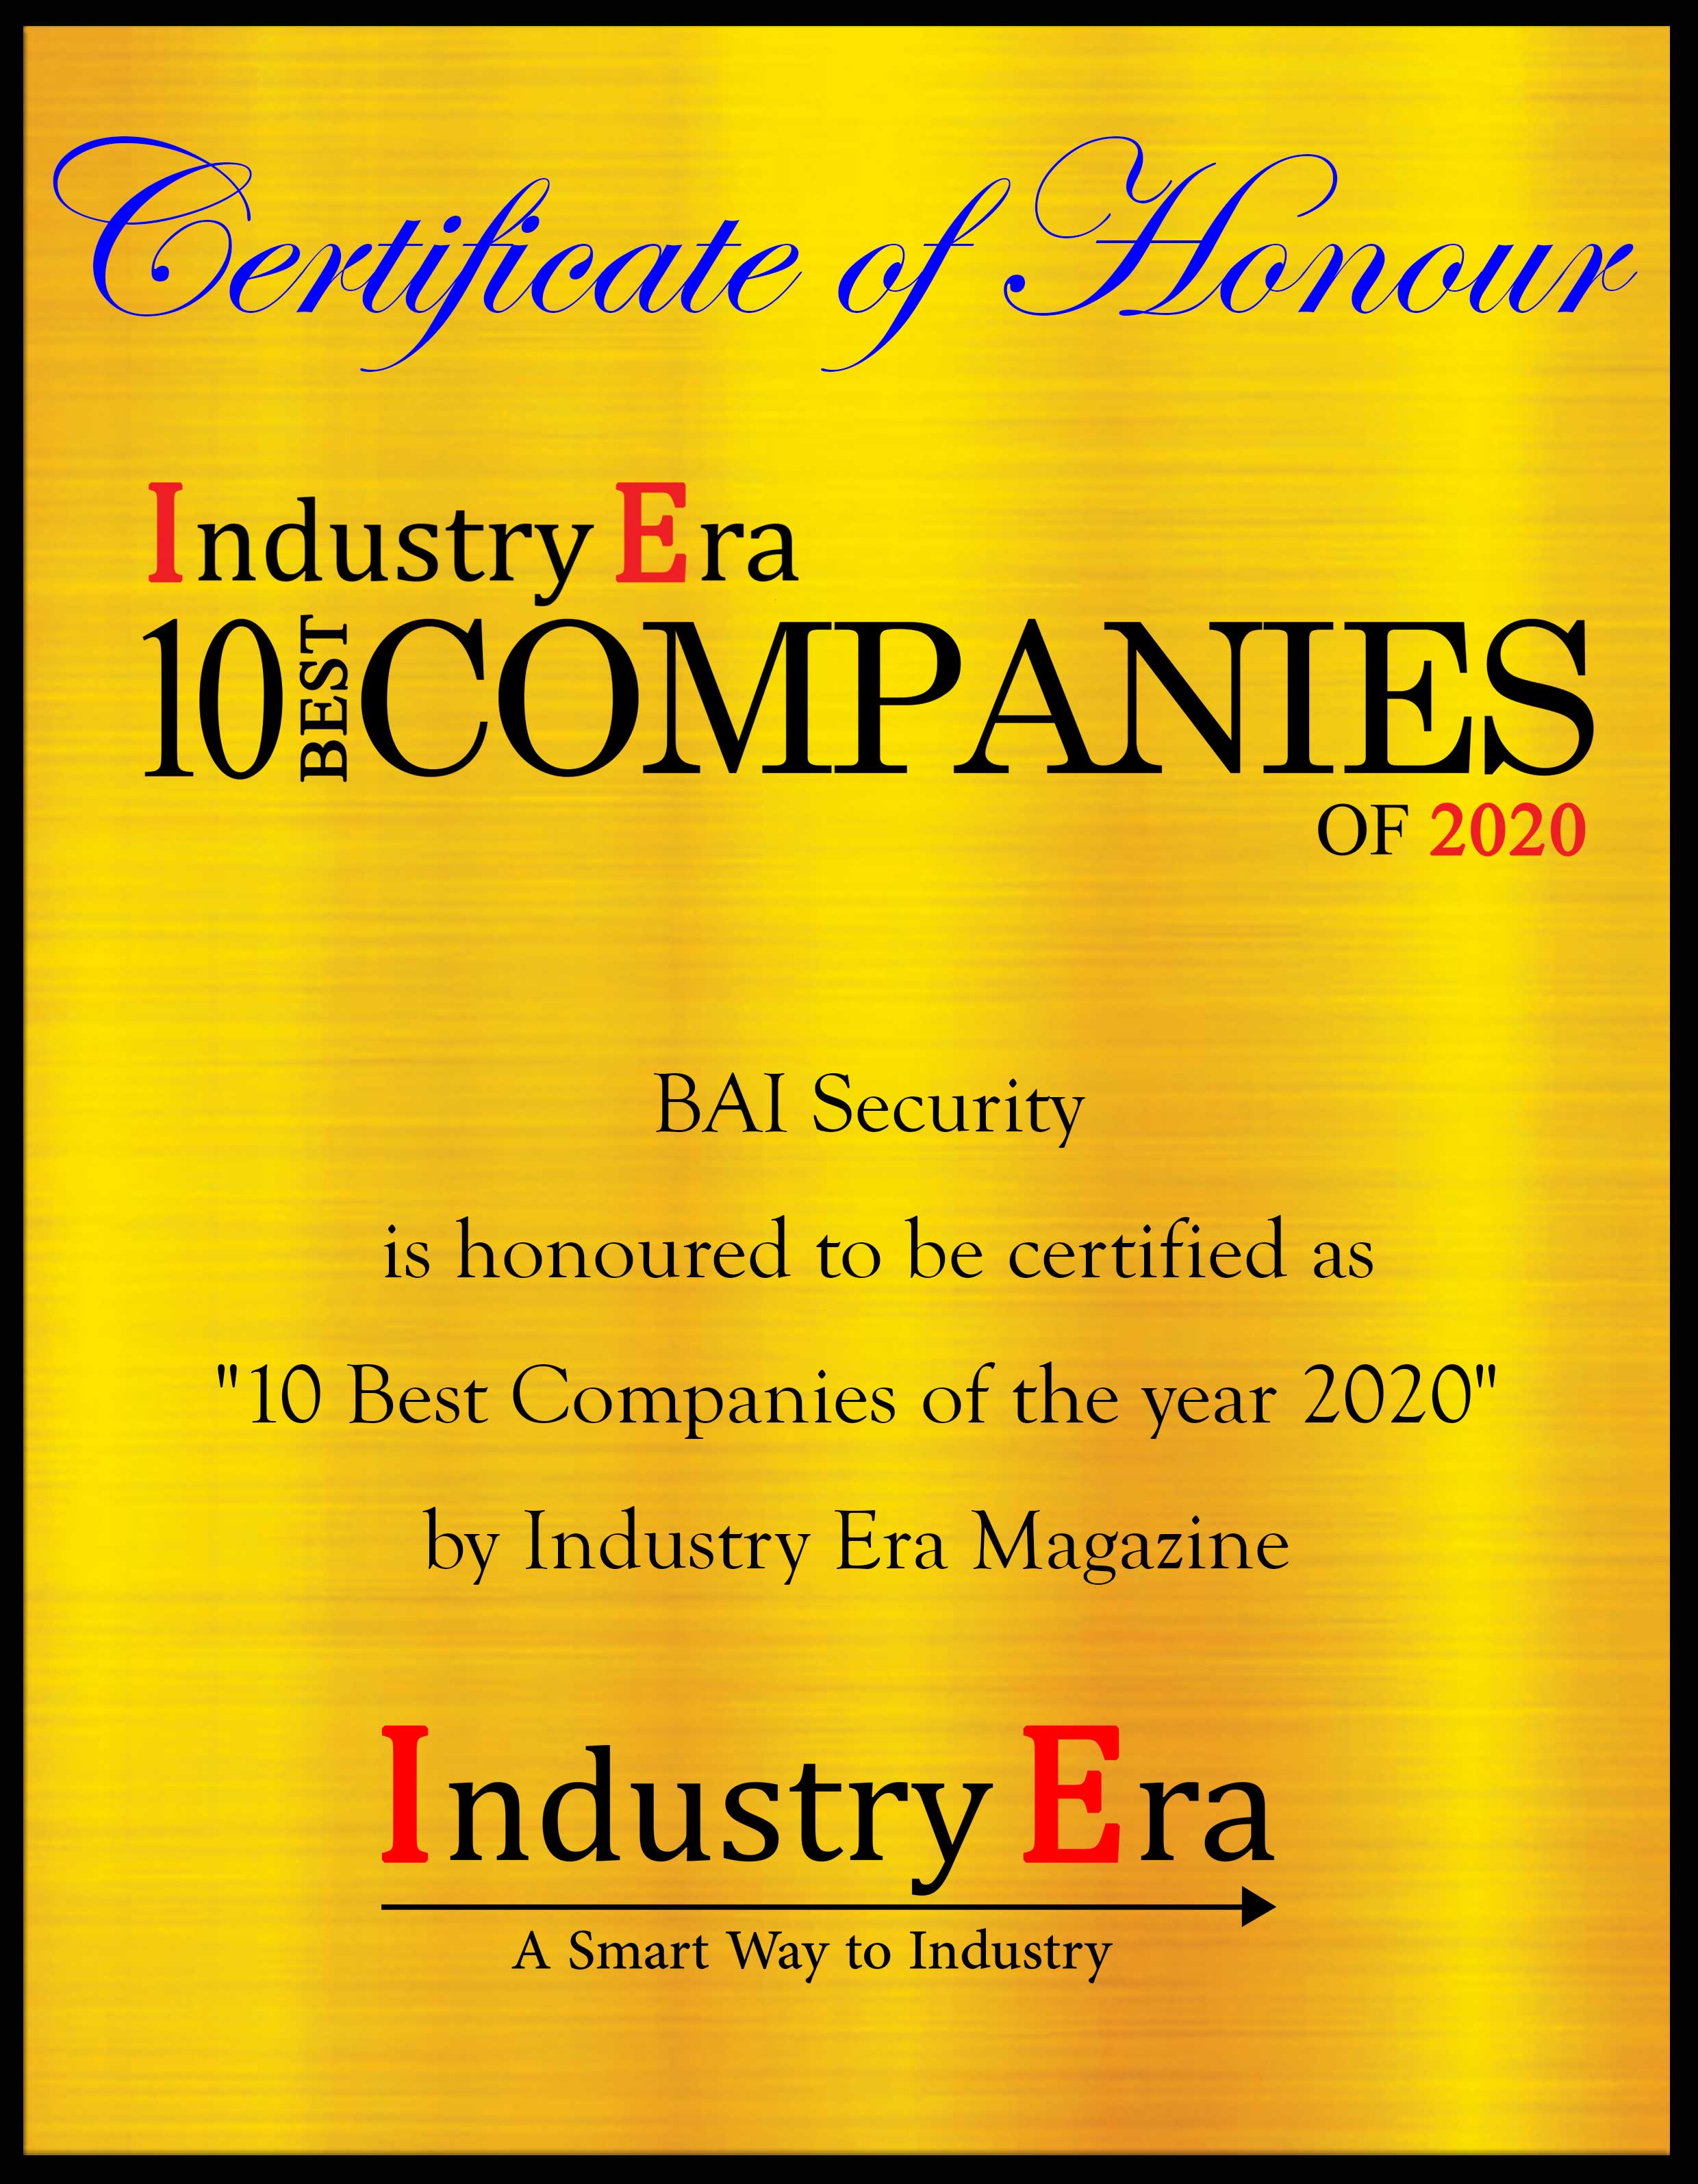 Michael Bruck President & CEO BAI Security 10 Best Companies of Year the 2020